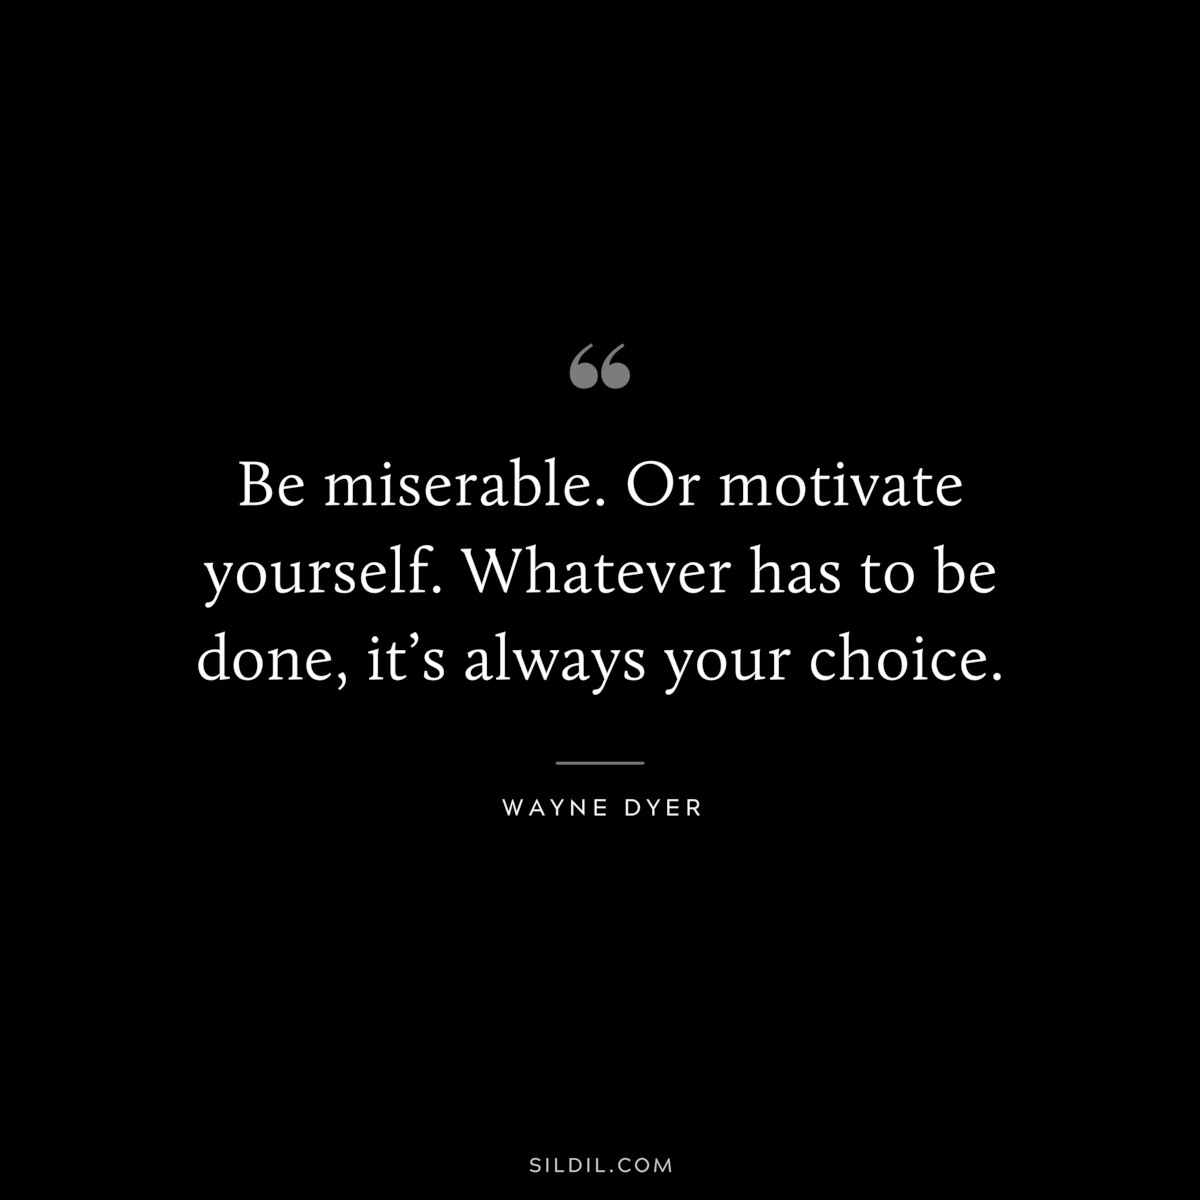 Be miserable. Or motivate yourself. Whatever has to be done, it’s always your choice. ― Wayne Dyer